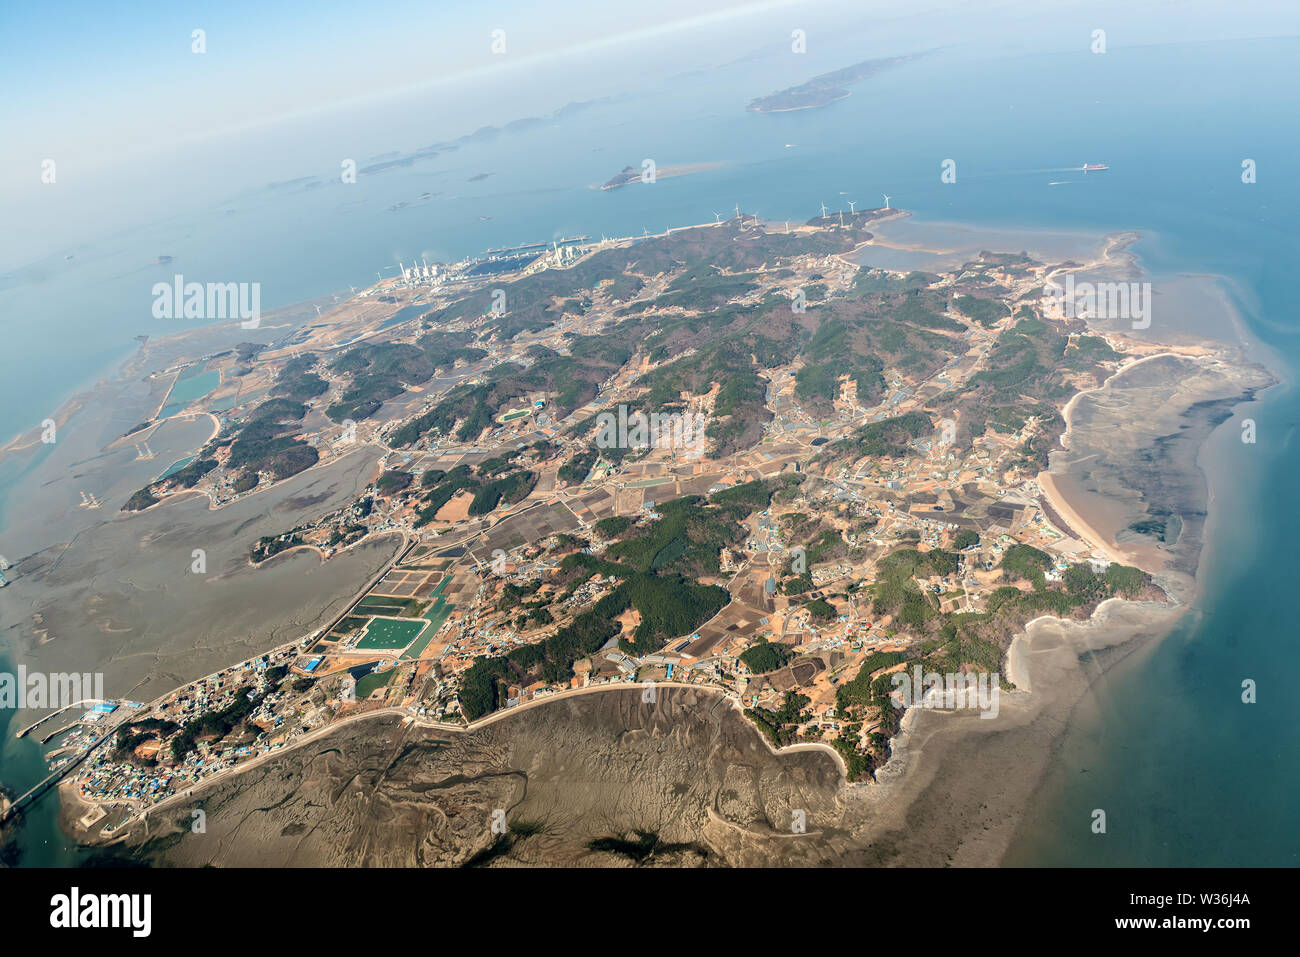 Aerial view of Yeongheung Island, in the Yellow Sea, within the municipal borders of Incheon metropolitan city,South Korea. Stock Photo